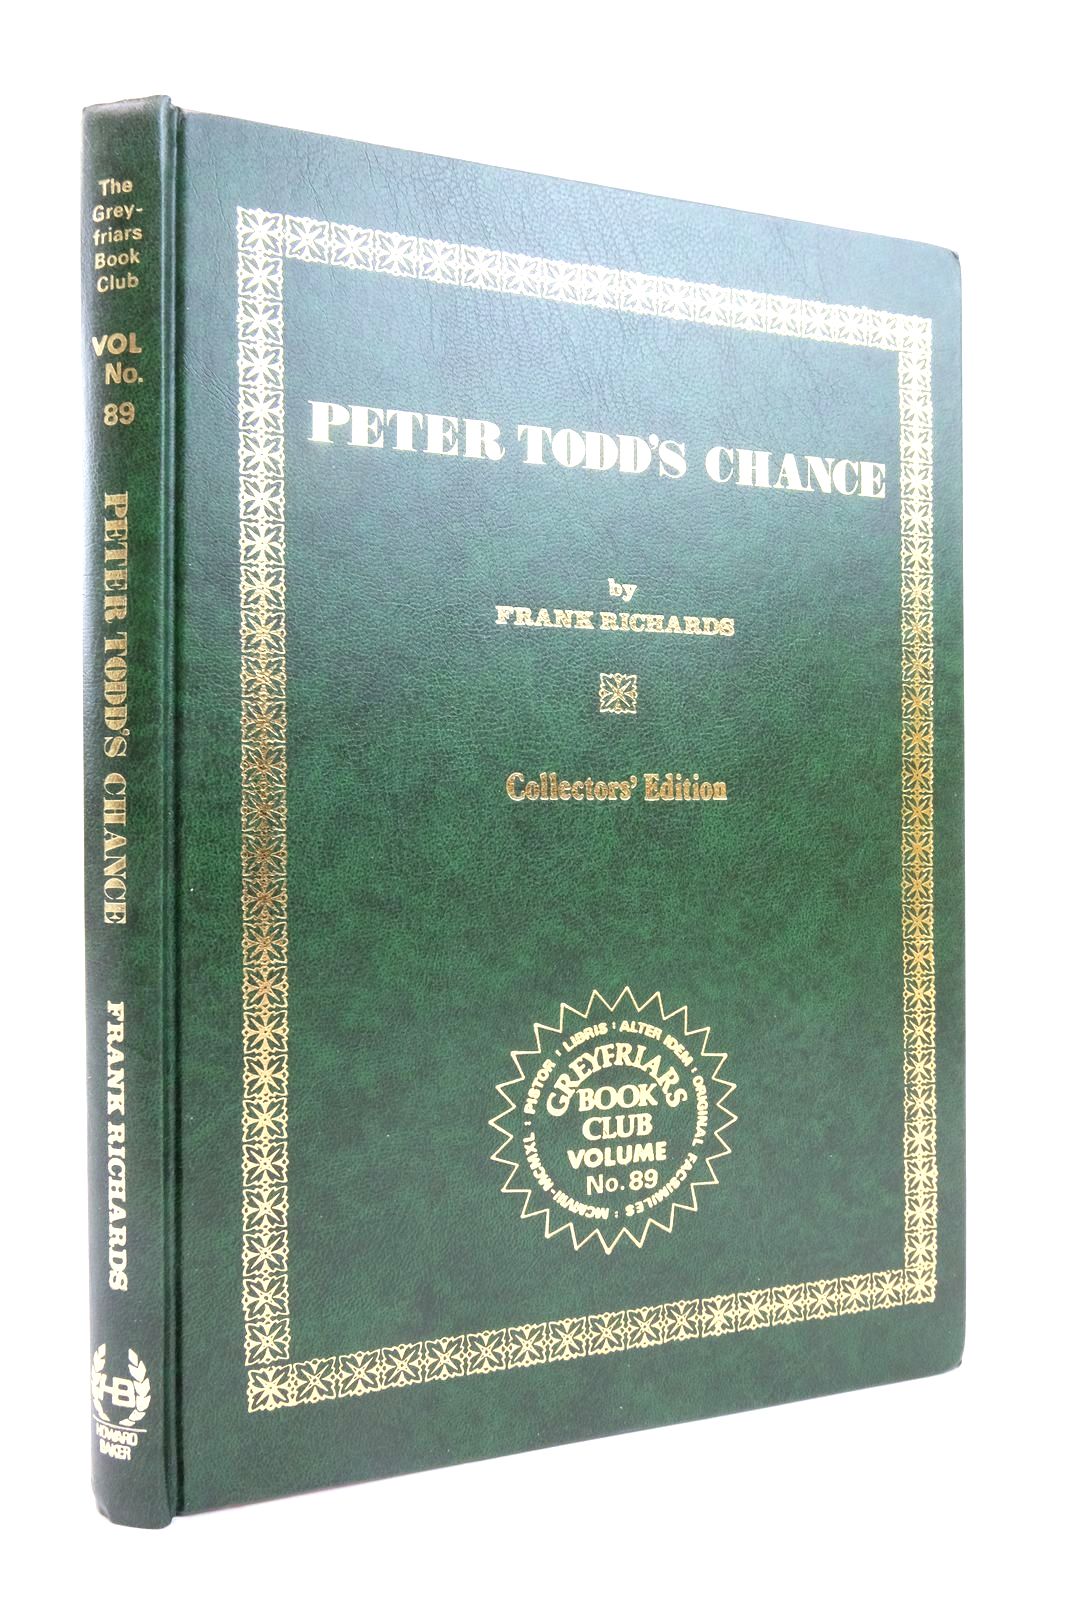 Photo of PETER TODD'S CHANCE written by Richards, Frank published by Howard Baker (STOCK CODE: 2136639)  for sale by Stella & Rose's Books